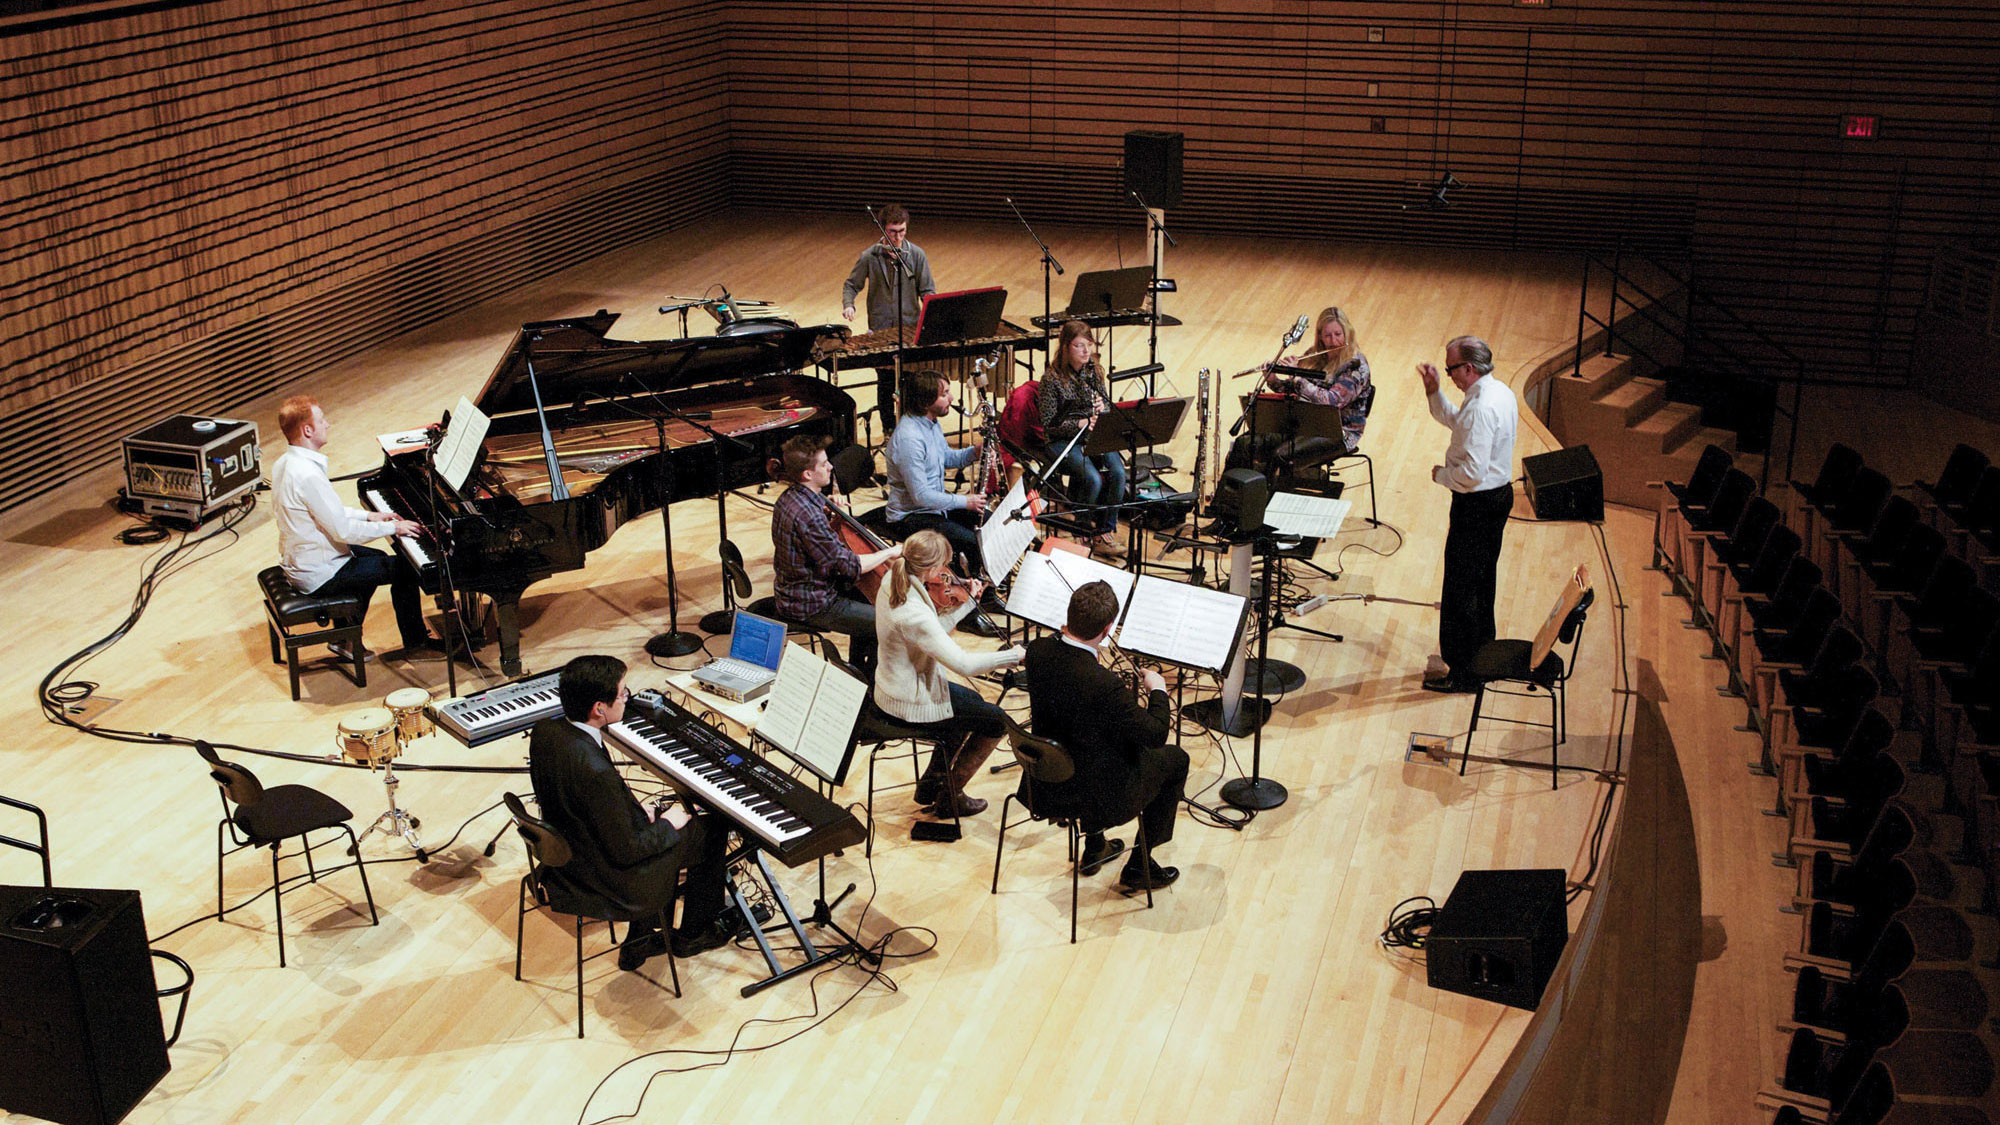 An aerial view of a small orchestra dressed casually in rehearsal on the concert hall stage